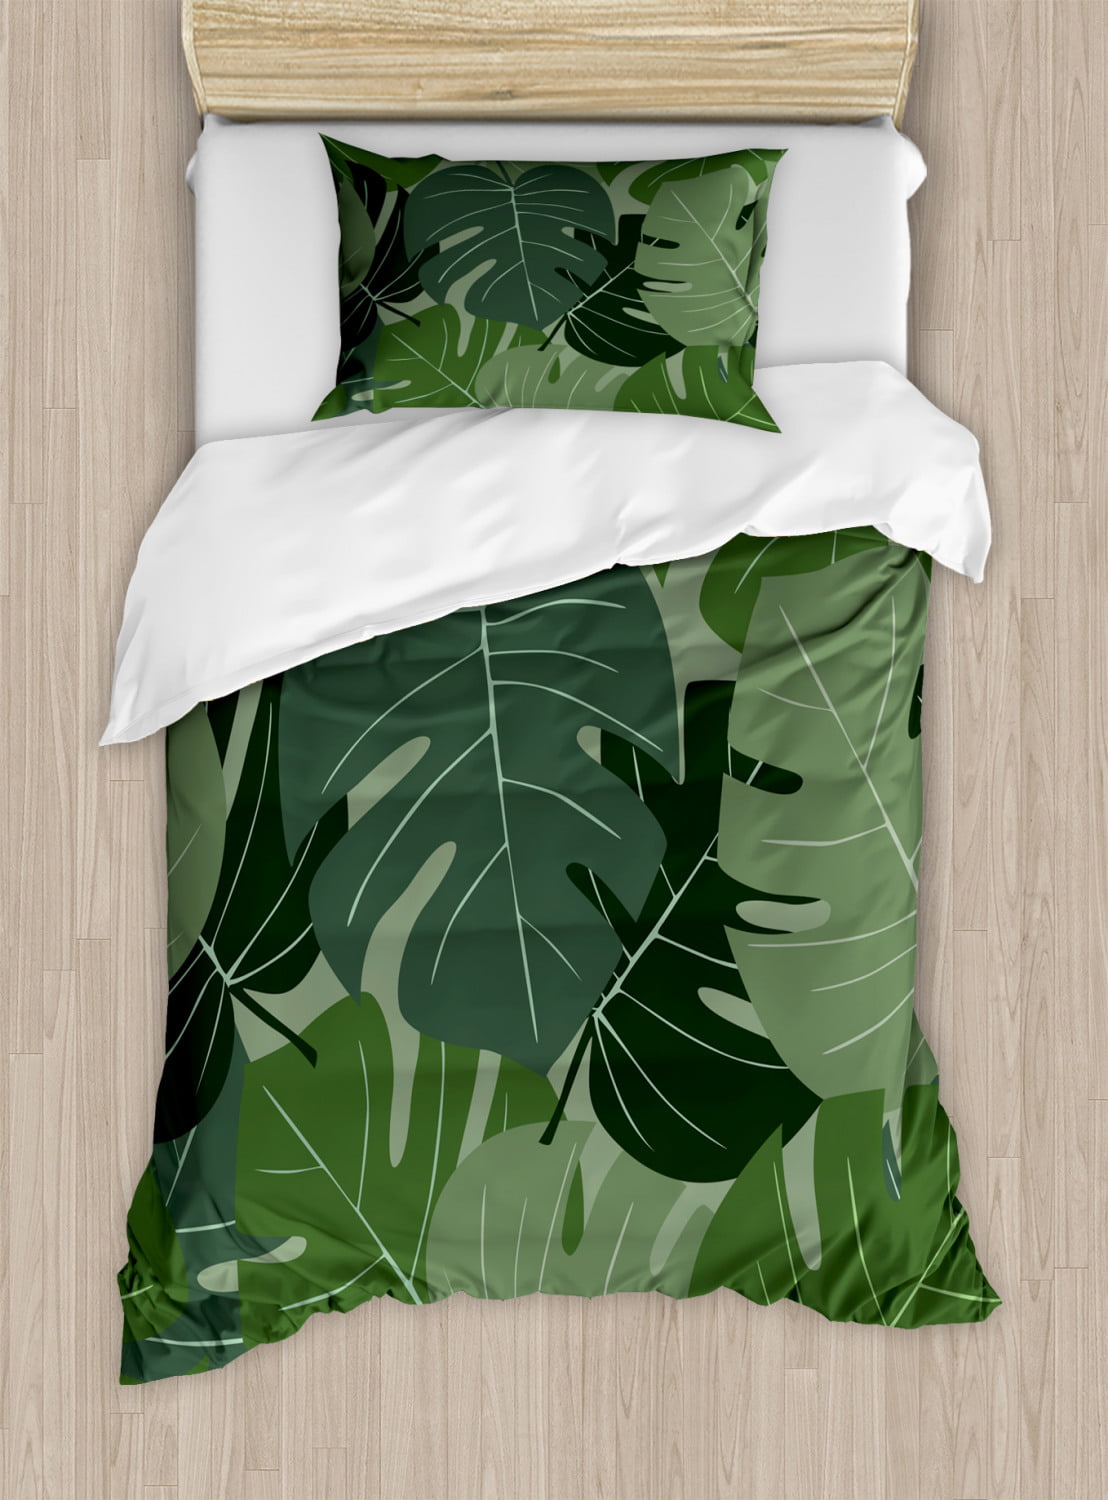 Forest Green Duvet Cover Set Twin Size, Forest Green Duvet Cover